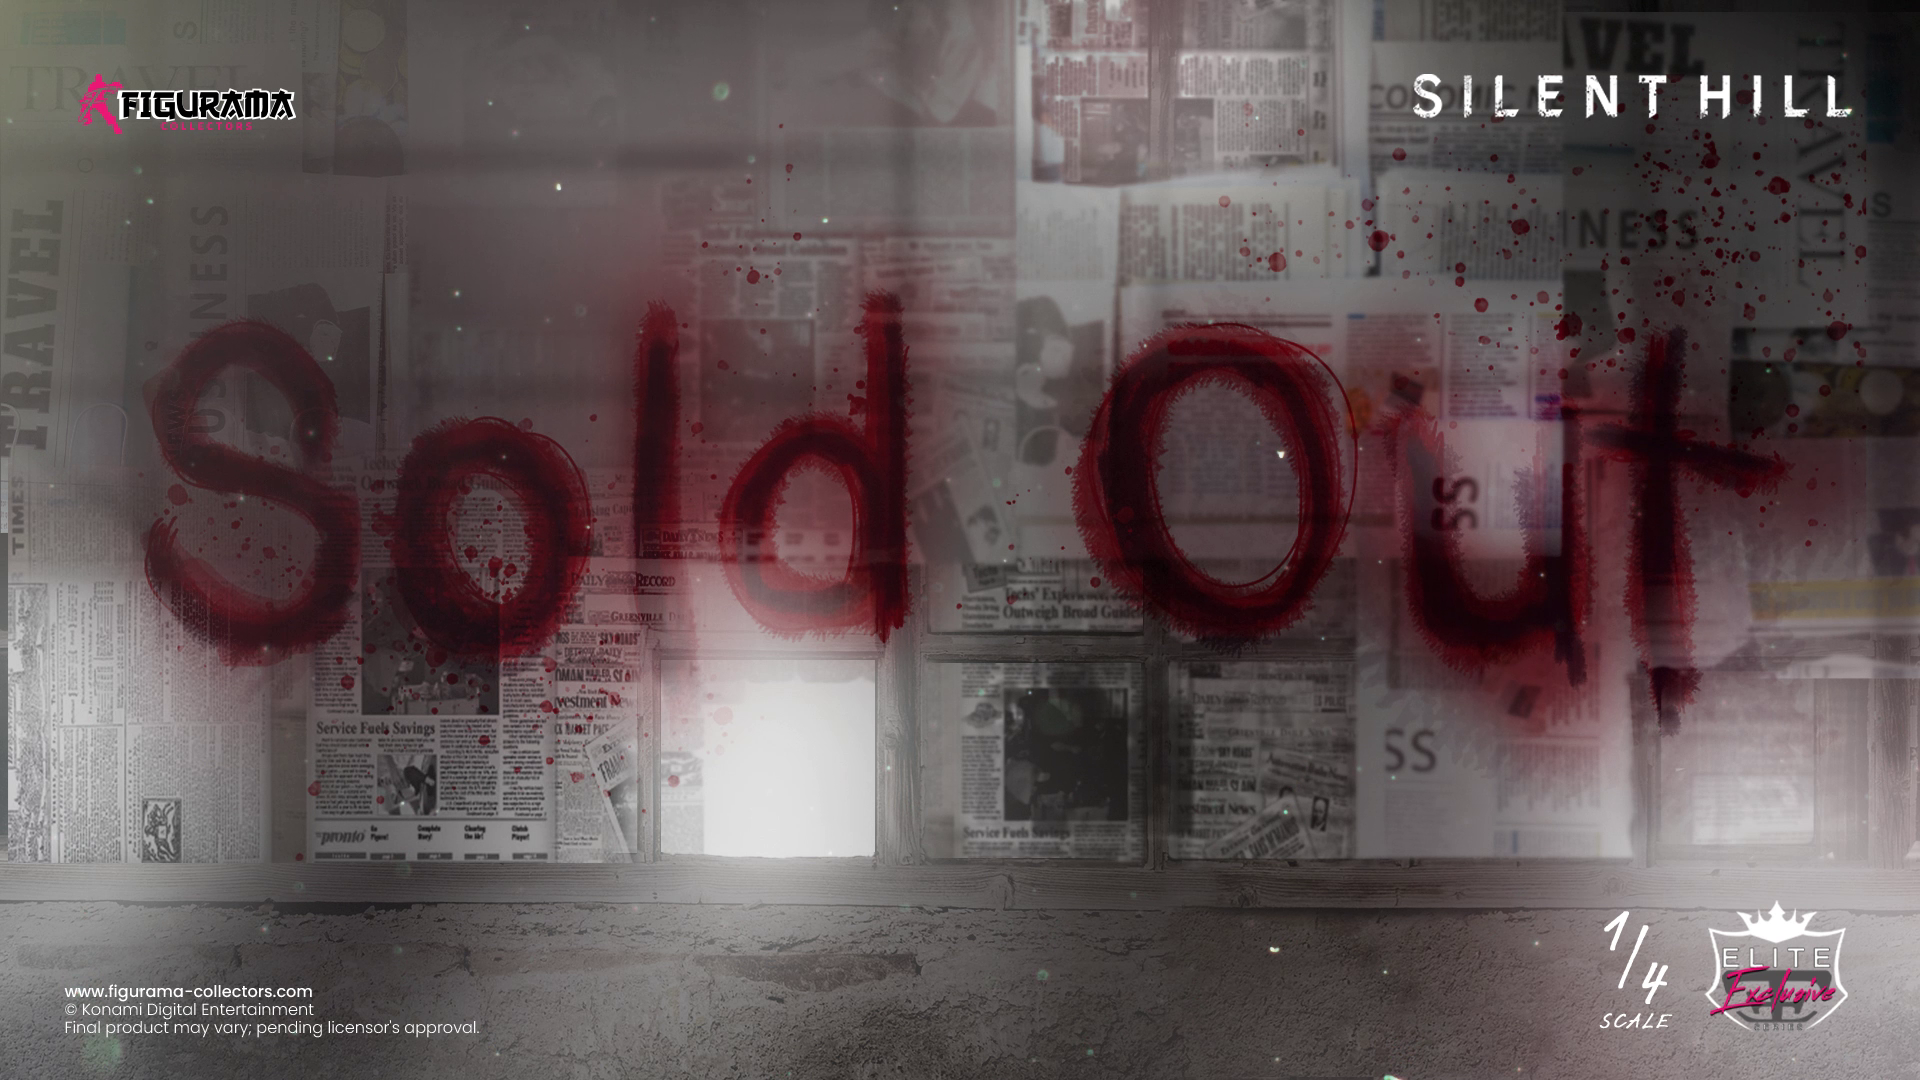 ⛓️ SOLD OUT - SILENT HILL 2 ELITE EXCLUSIVE 🩸